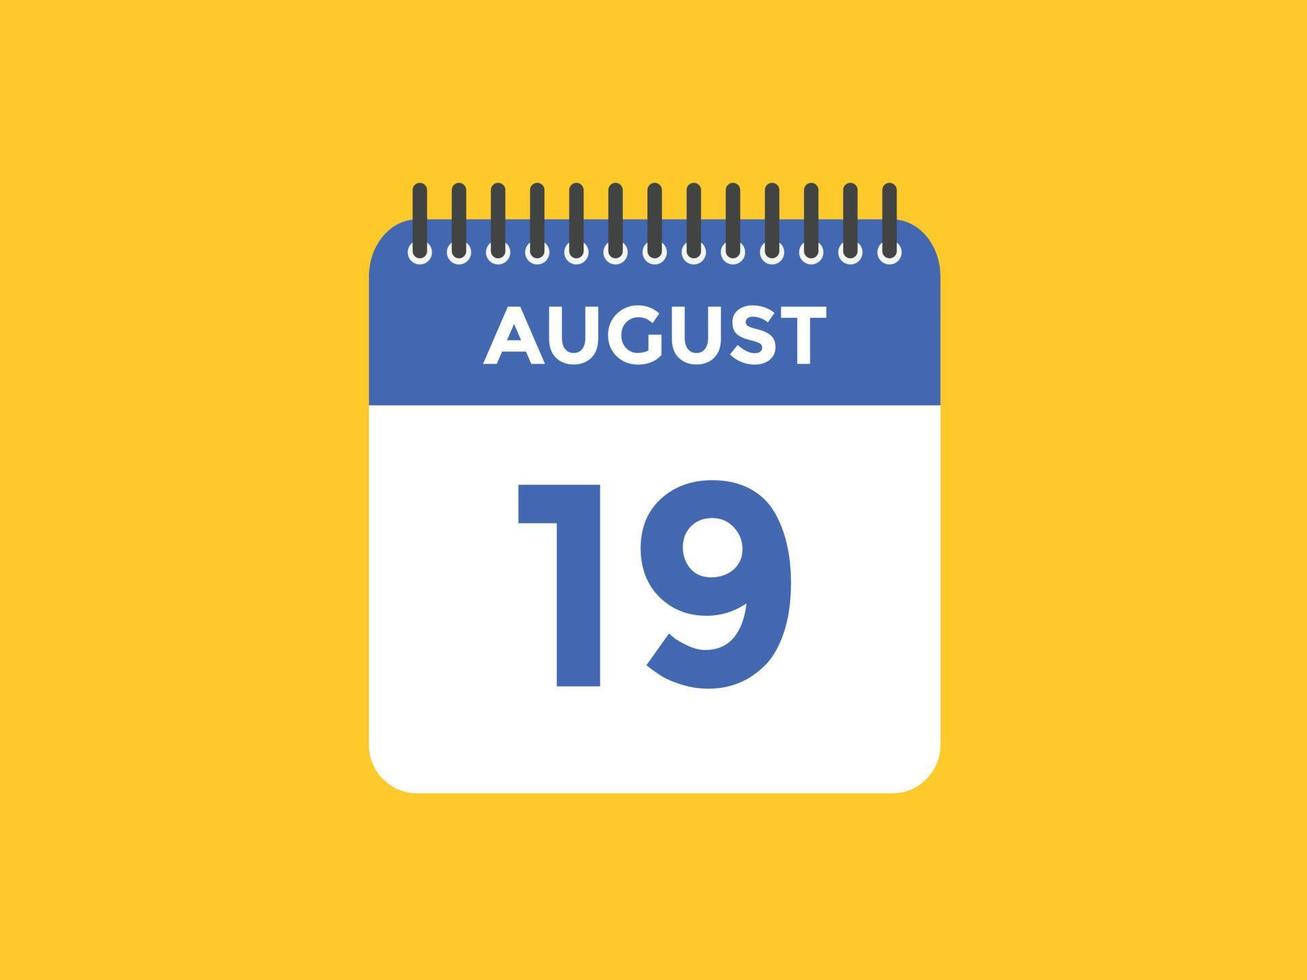 august 19 calendar reminder. 19th august daily calendar icon template. Calendar 19th august icon Design template. Vector illustration